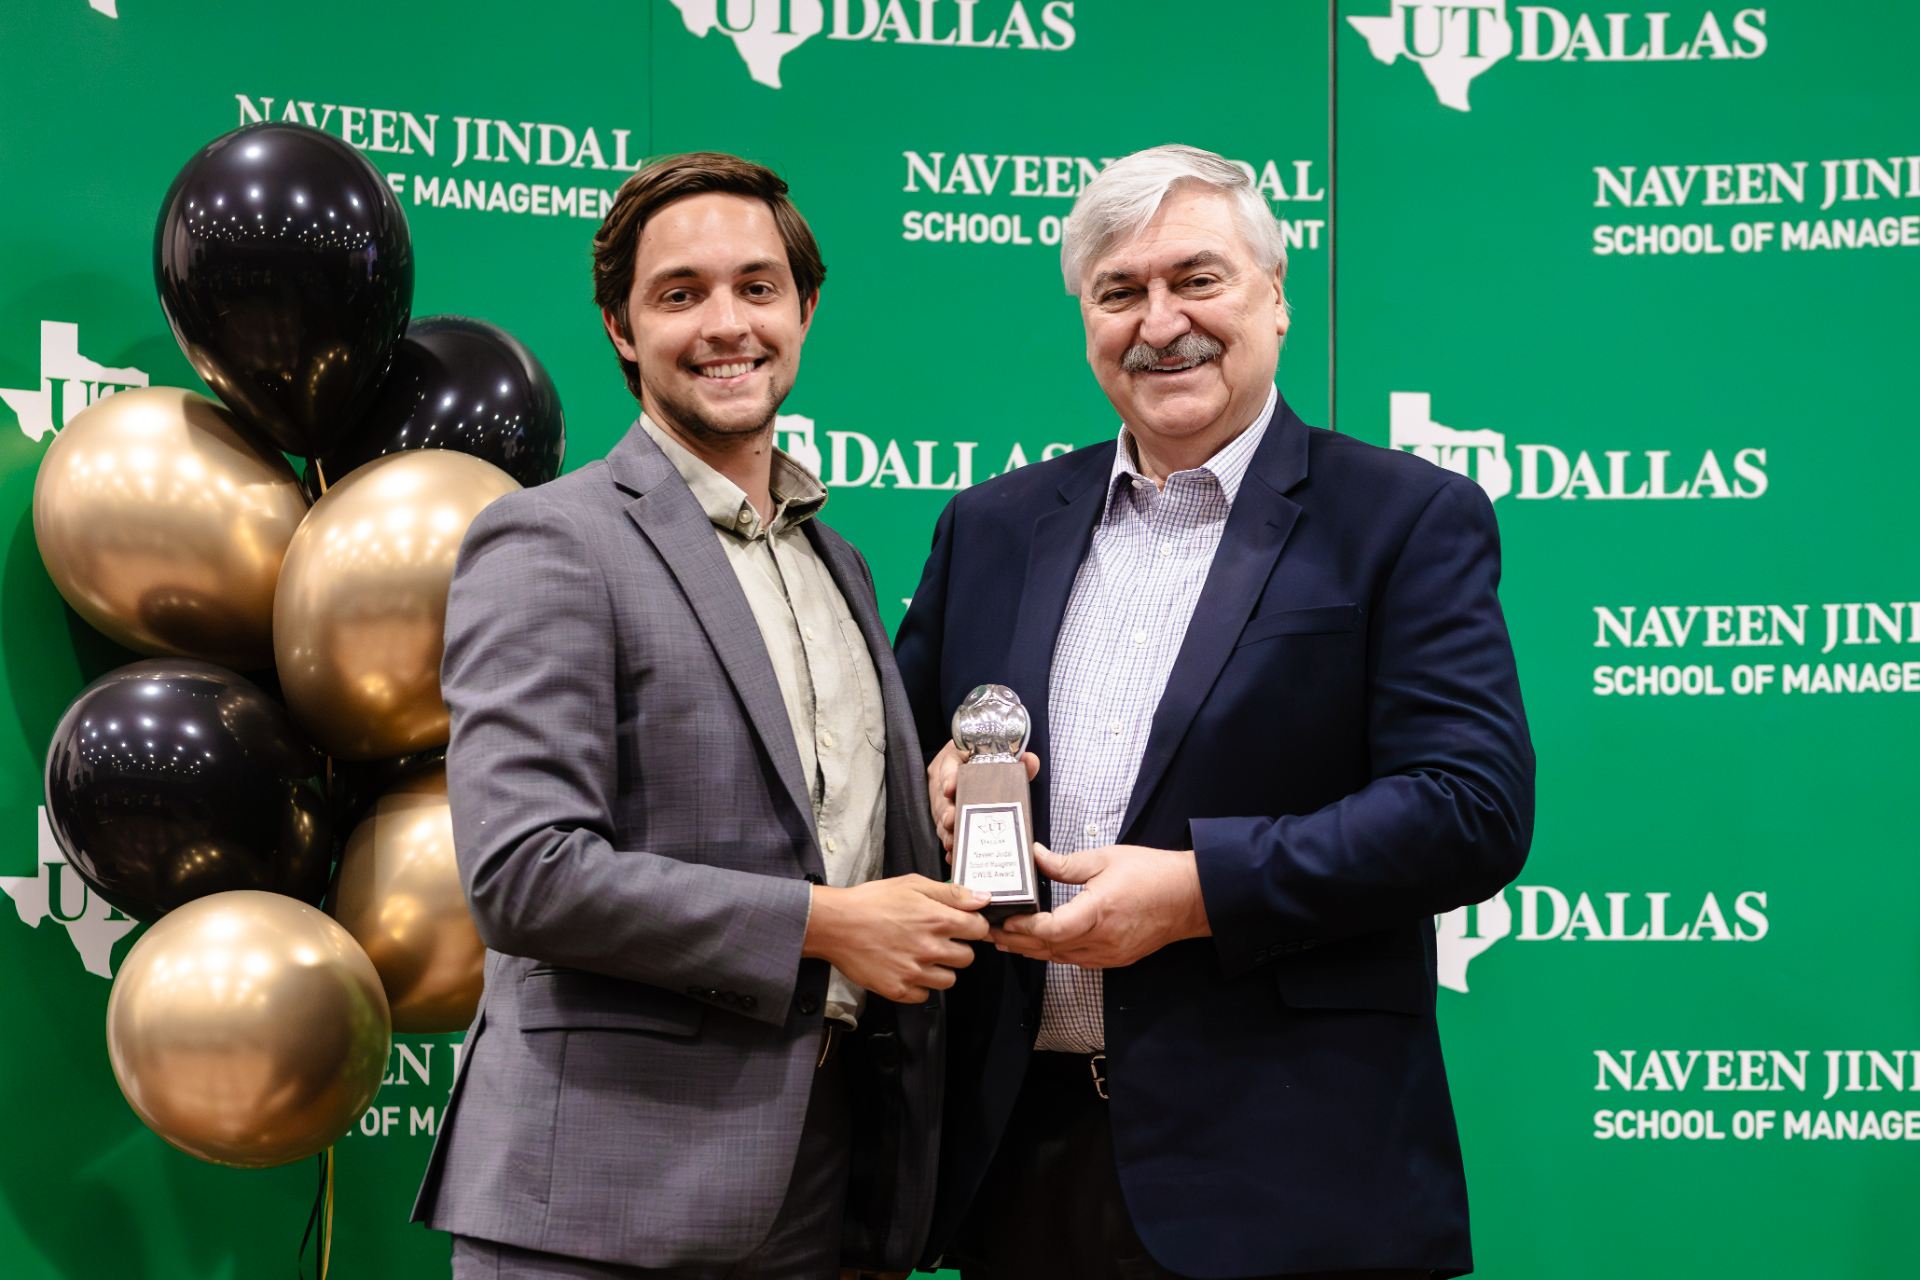 Dean Pirkul presents Graduate Student of the Year OWLIE award to Griffen Henderson